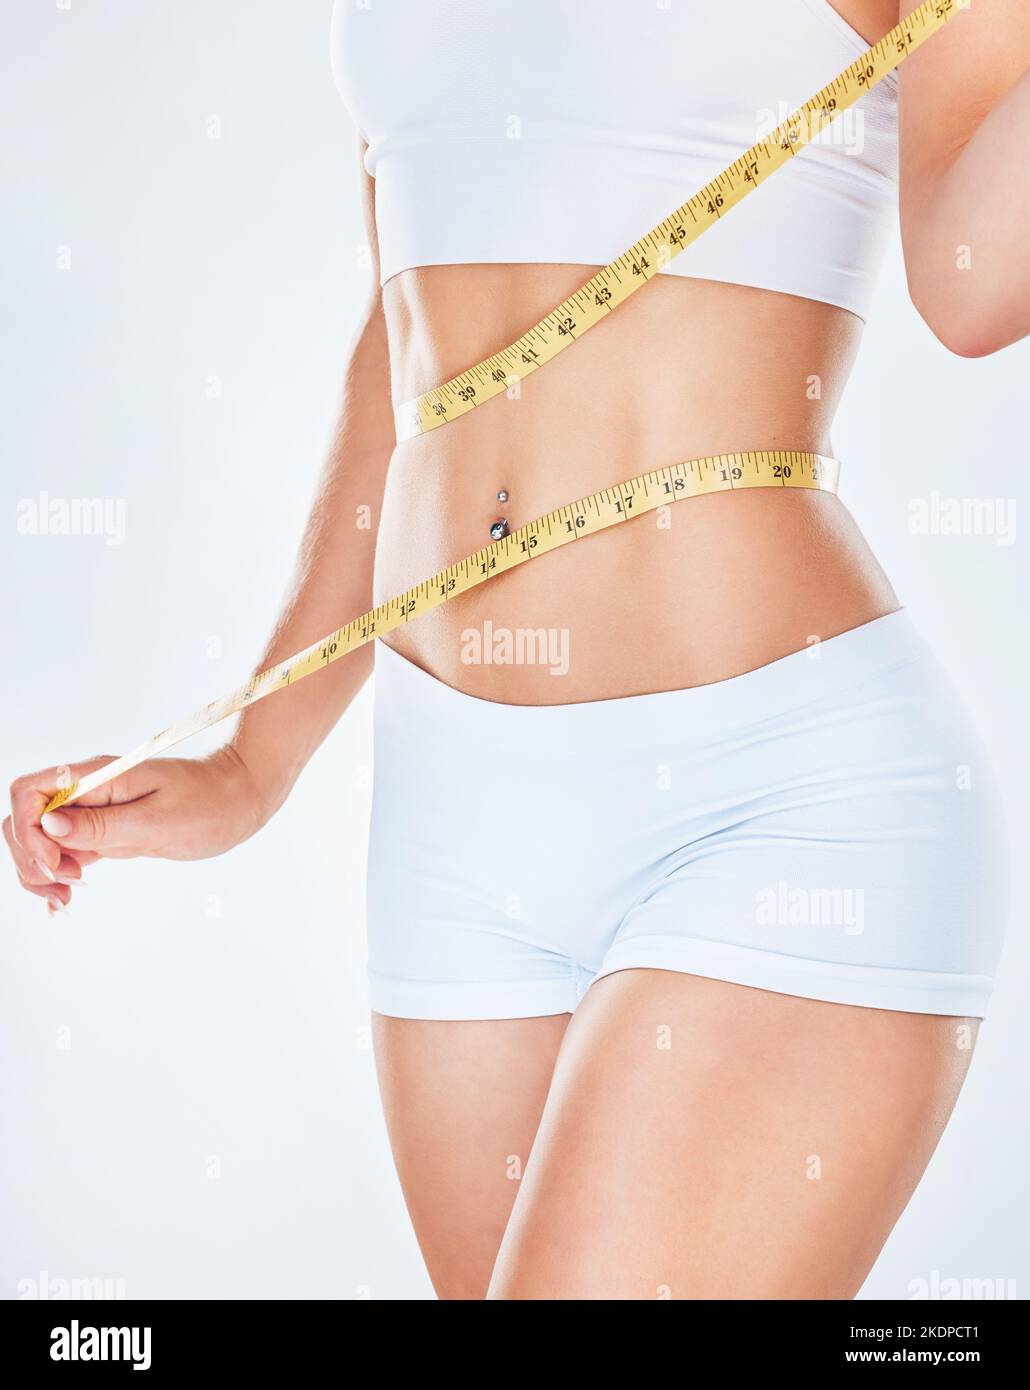 https://c8.alamy.com/comp/2KDPCT1/body-tape-measure-and-diet-with-a-woman-measuring-her-waist-to-track-weightloss-in-studio-on-a-gray-background-fitness-health-and-wellness-with-a-2KDPCT1.jpg